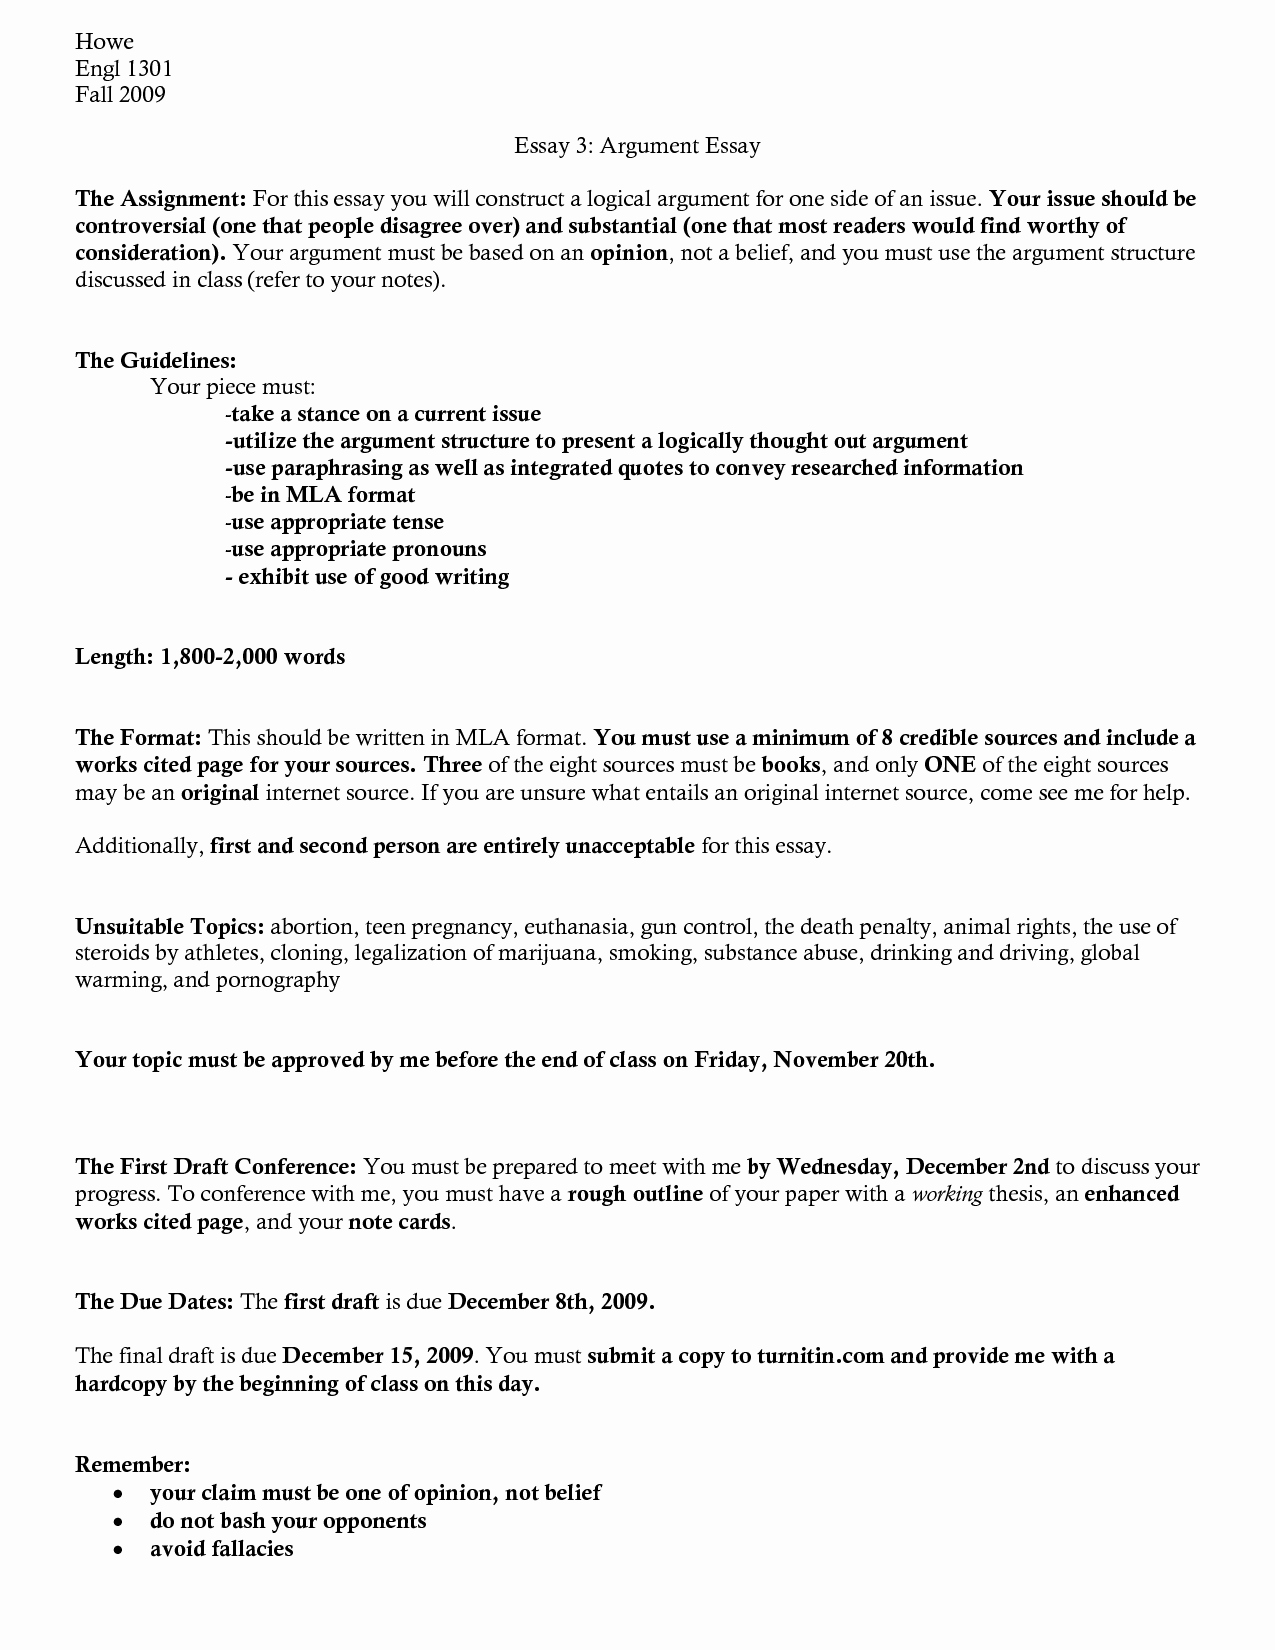 Mla format Outline Template Lovely Outline Generator for Research Paper Mla